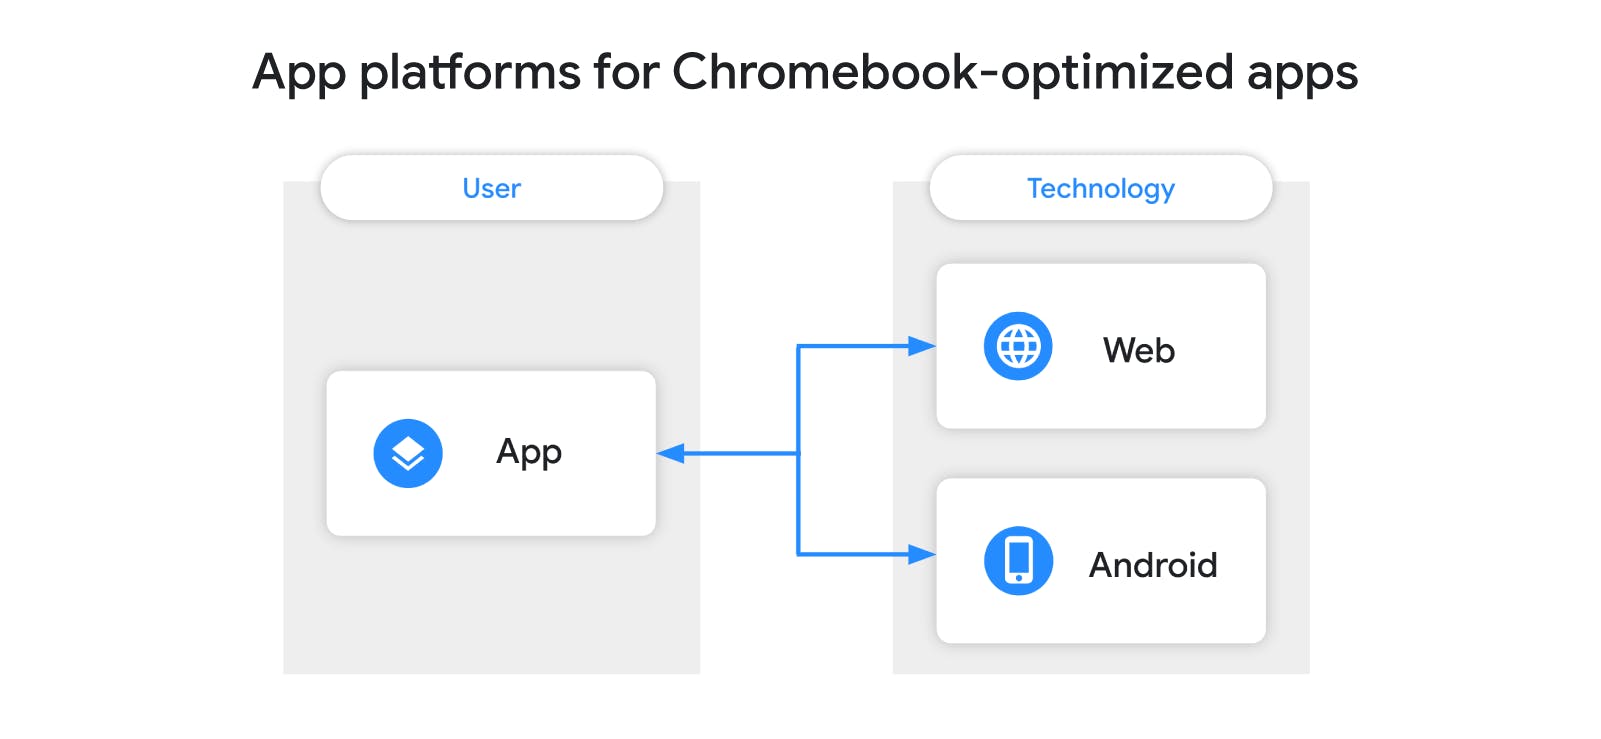 A chart of app platforms for building Chromebook-optimized apps. Devs can use the web and Android to build apps and games optimized for Chromebook users.